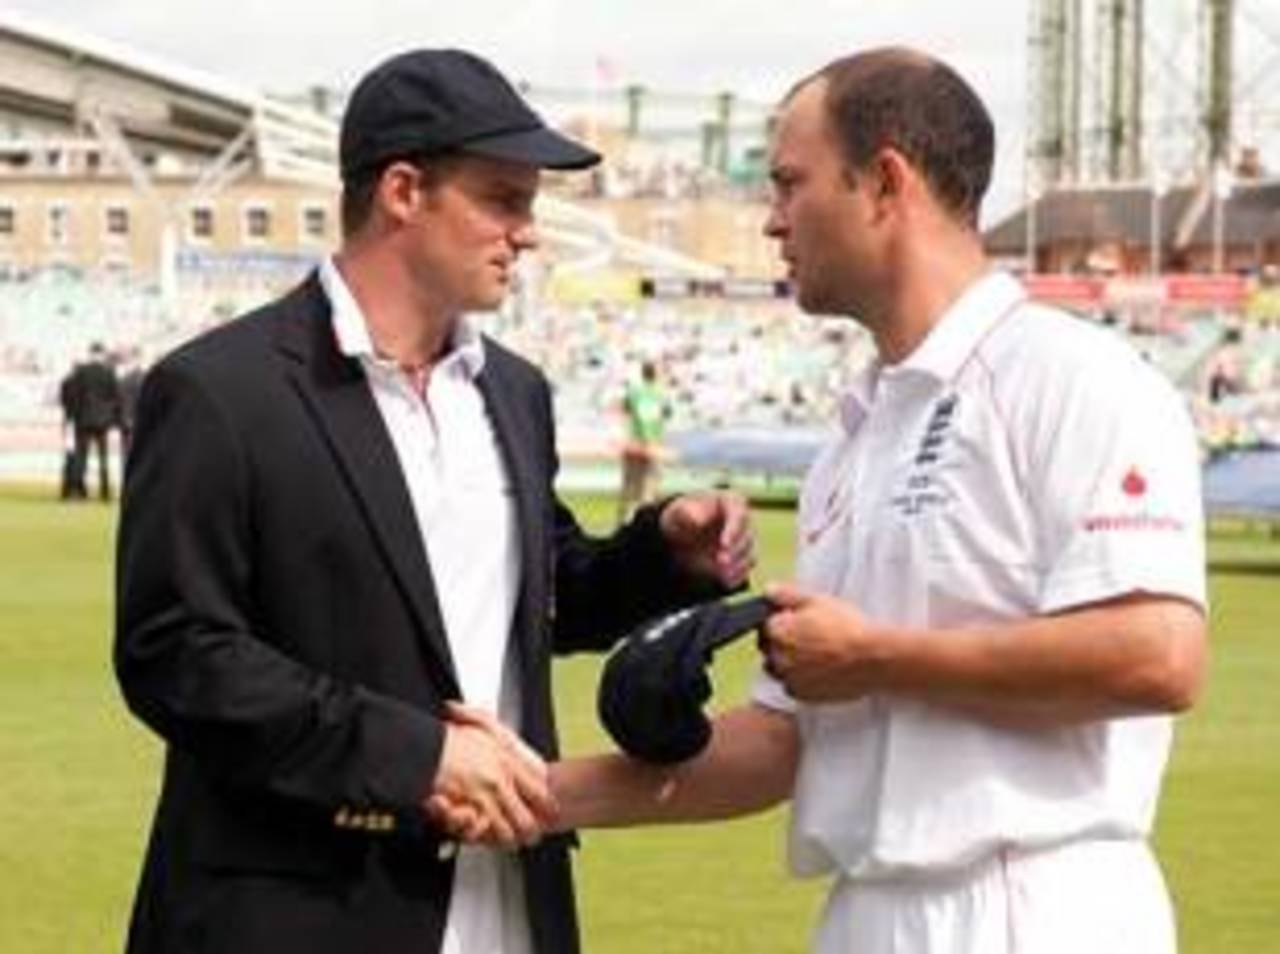 Andrew Strauss presents Jonathan Trott with his Test cap, England v Australia, 5th Test, The Oval, 1st day, August 20, 2009